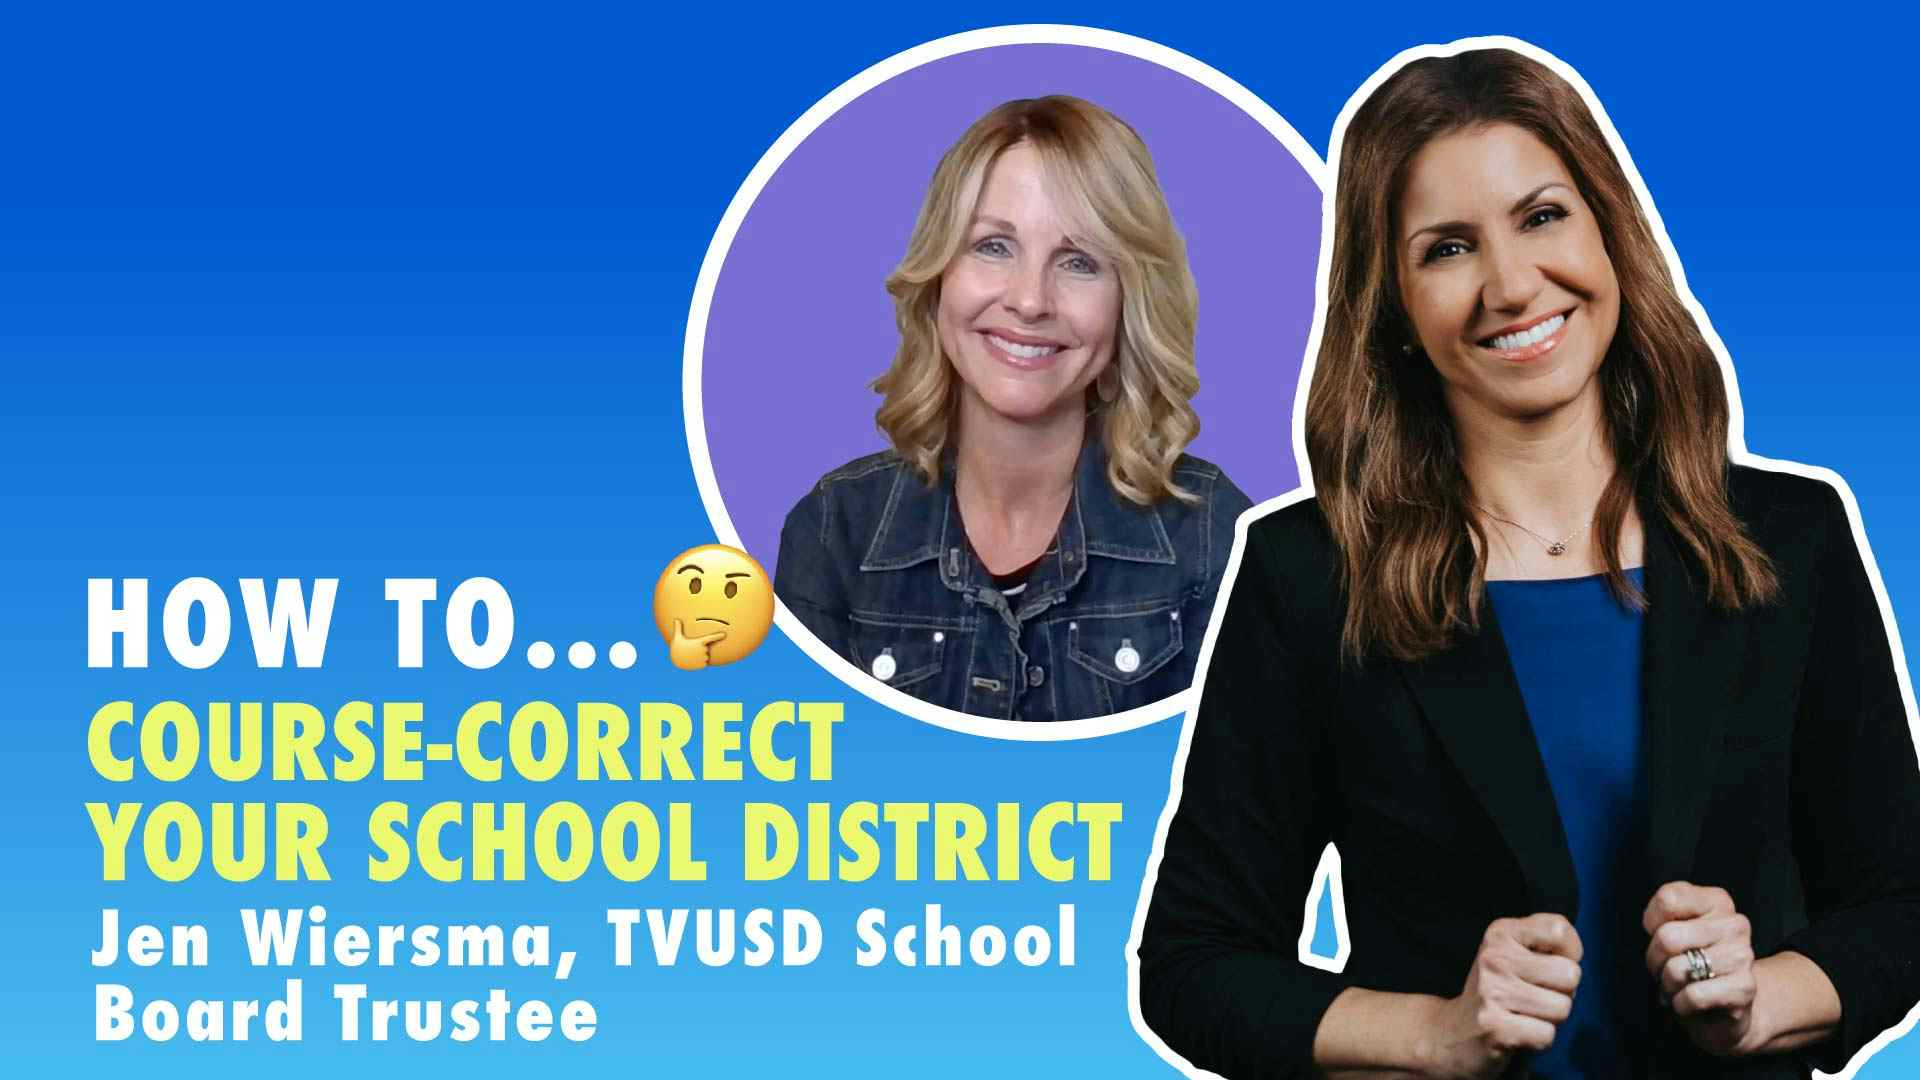 How To Course-Correct Your School District with Jennifer Wiersma